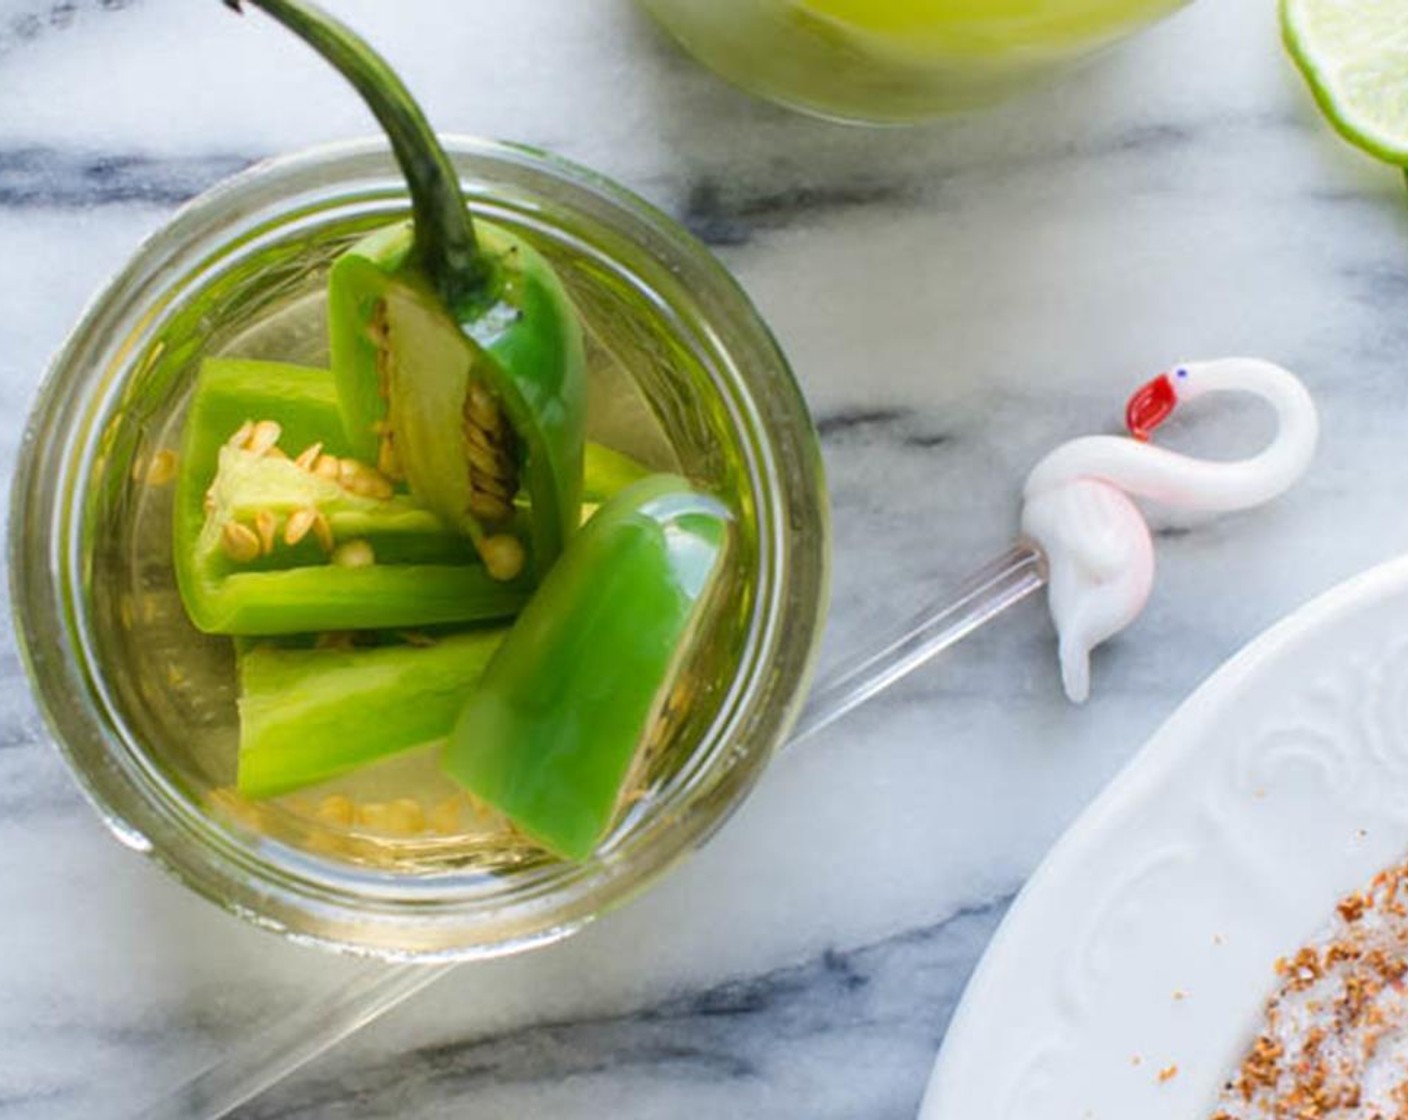 step 6 In a glass jar, add the jalapeno and cover with Reposado Tequila (1 1/2 cups). Cover and refrigerate until chilled, around 2-4 hours (the longer it steeps, the spicier it gets).